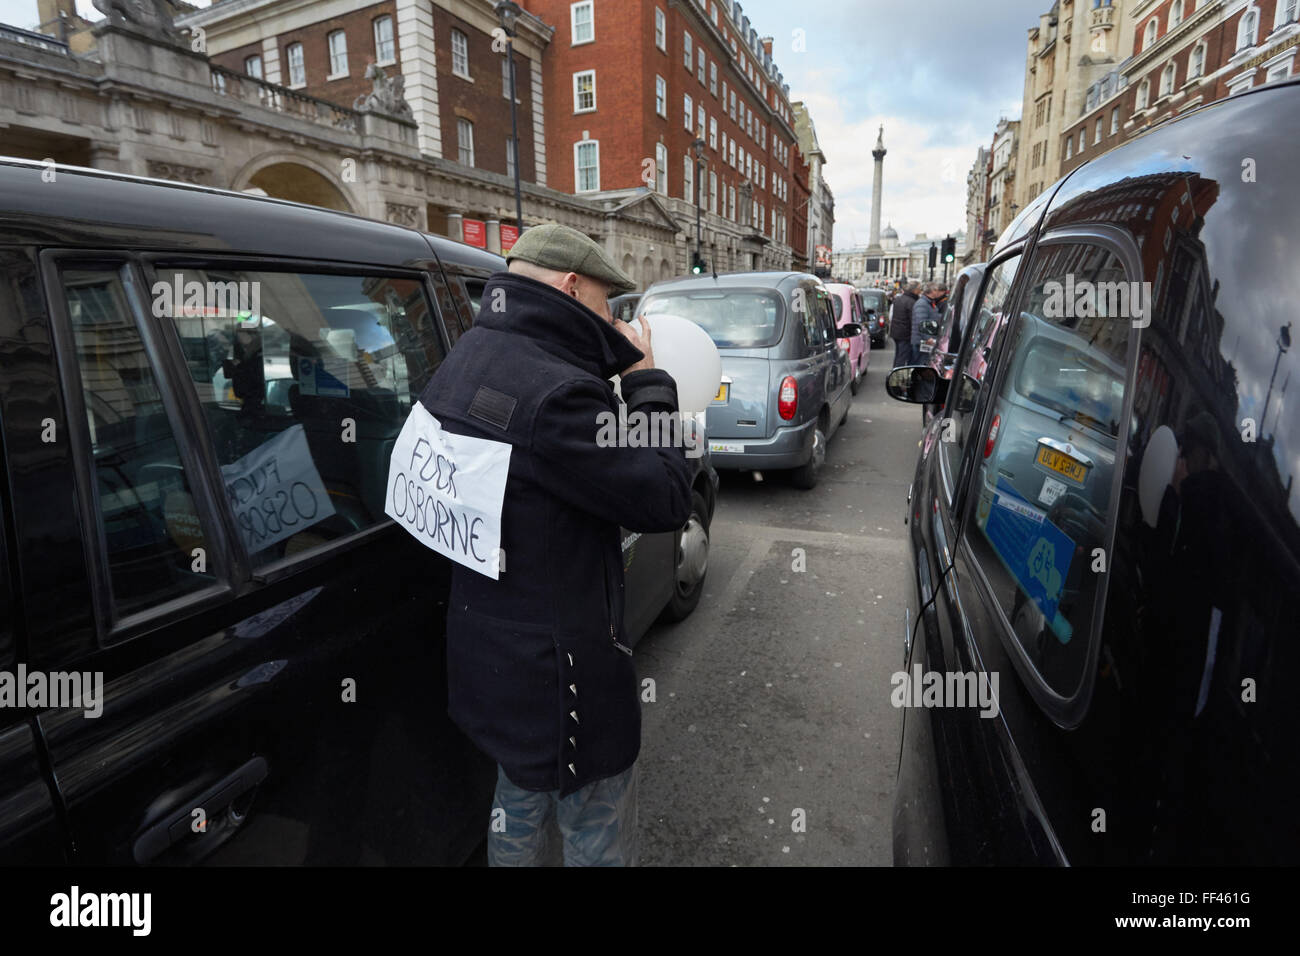 London, UK. 10th February, 2016. London black cab drivers cause traffic jams in central London as a protest against new taxi regulations. Credit:  Steve Hickey/Alamy Live News Stock Photo